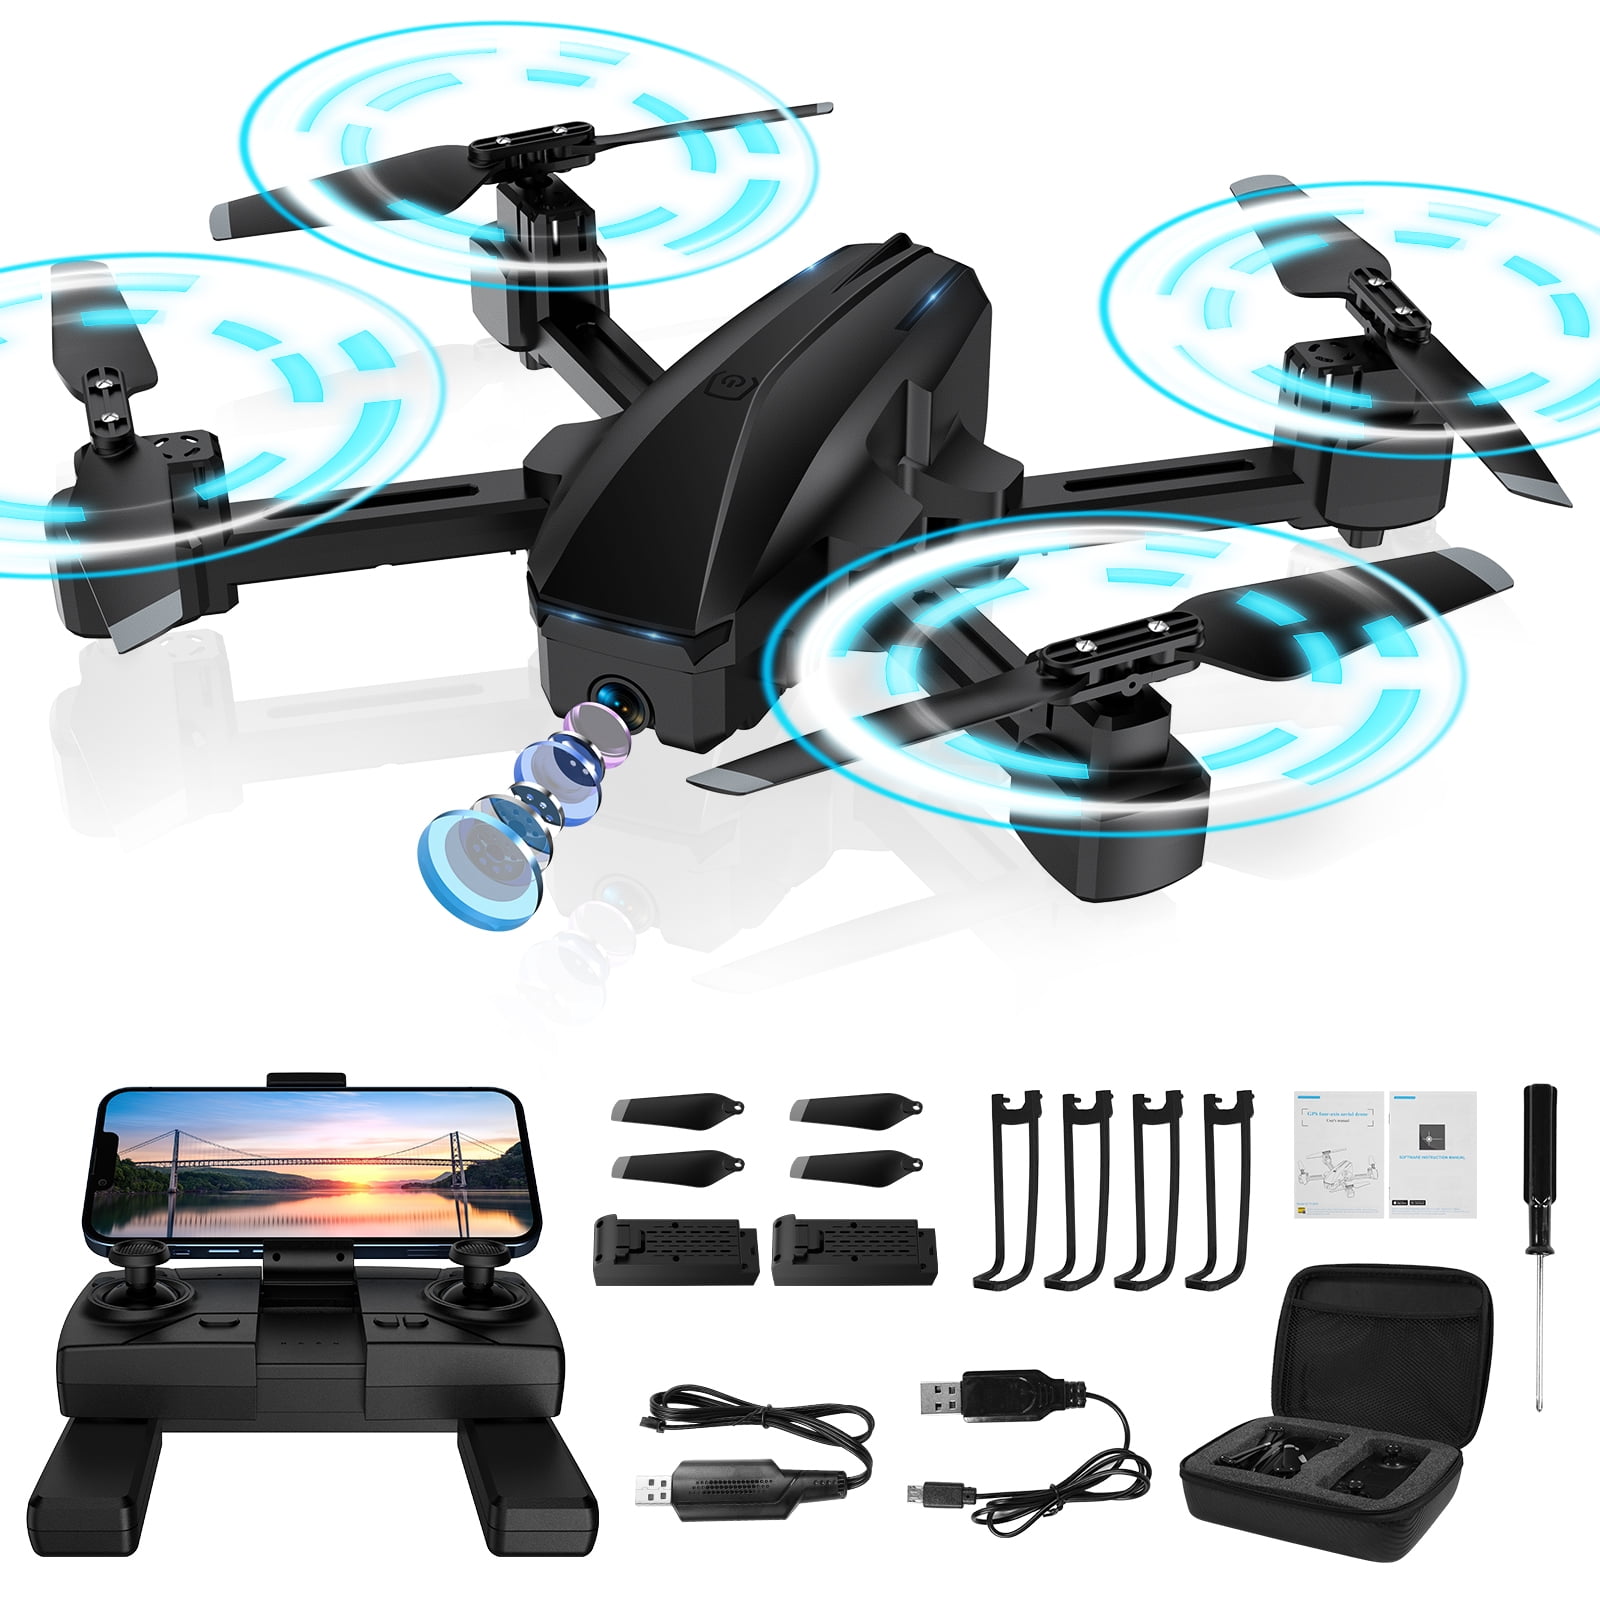 thespian latin regn Febfoxs Drone S177G with 4K Camera for Adults and Beginners Foldable GPS  Drone Auto Return Home Follow Me Mode 2 Batteries Double the Flight Time -  Walmart.com